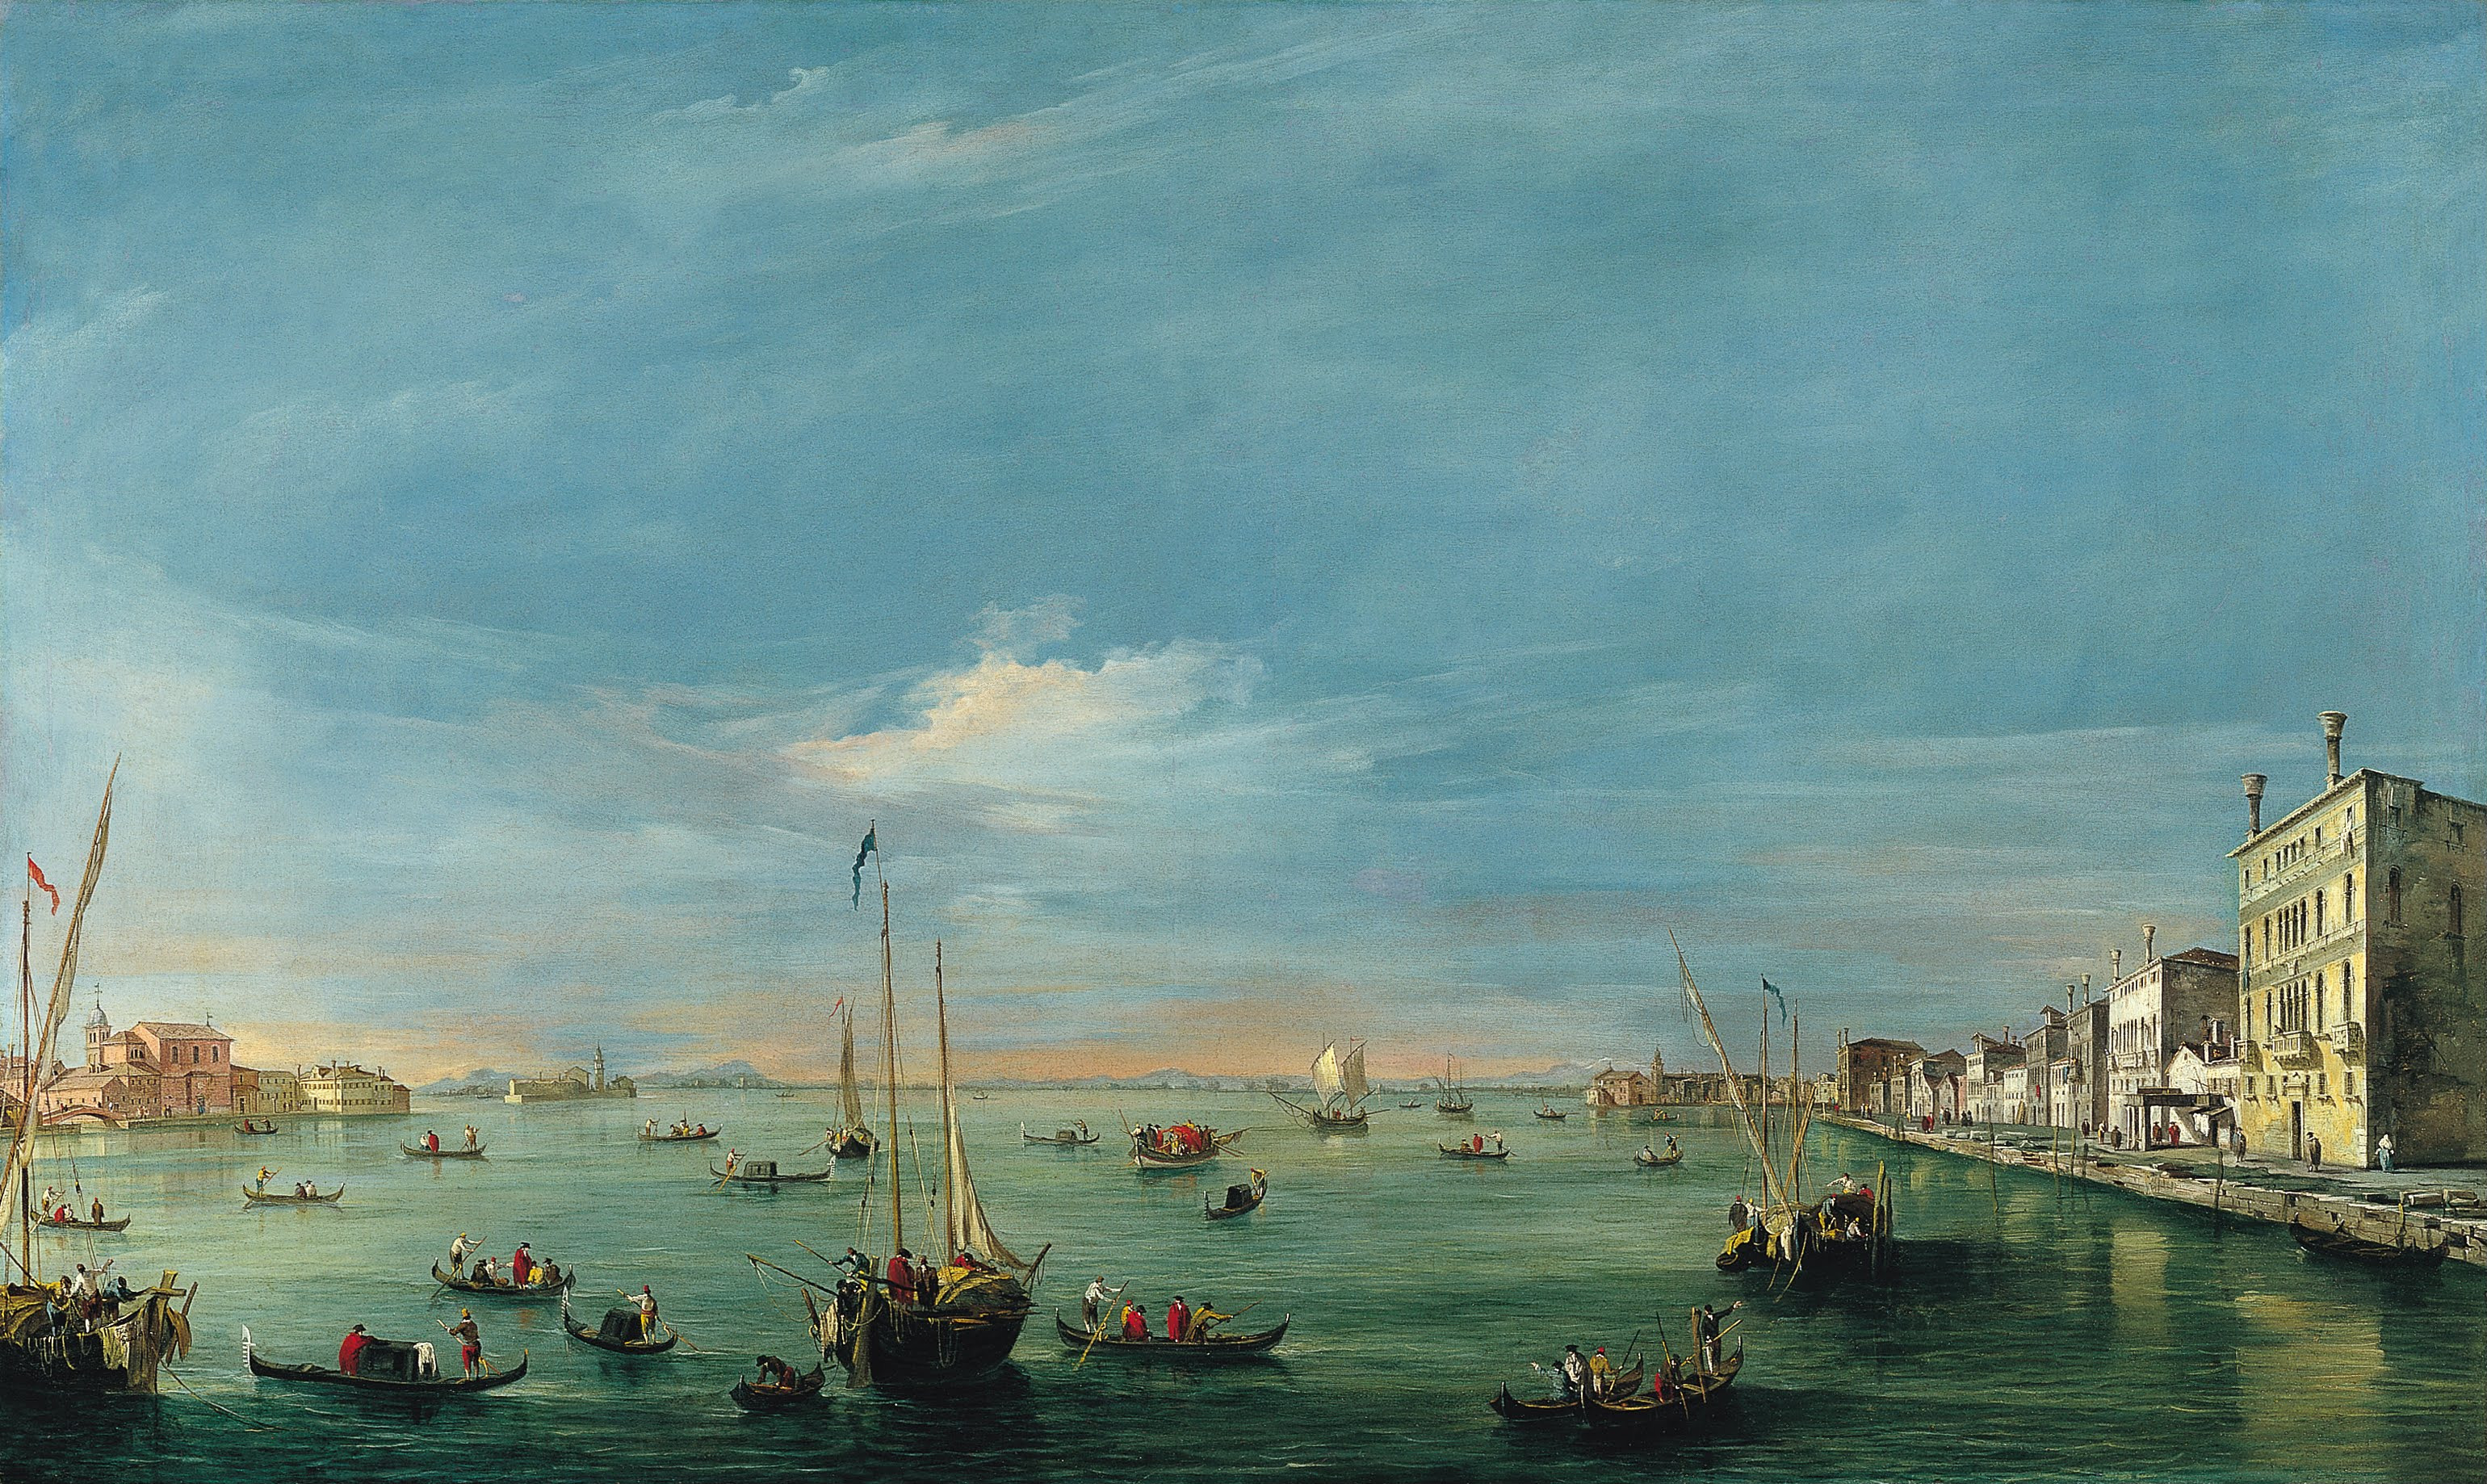 Francesco_Guardi_-_View_of_the_Giudecca_Canal_and_the_Zattere_-_Google_Art_Project